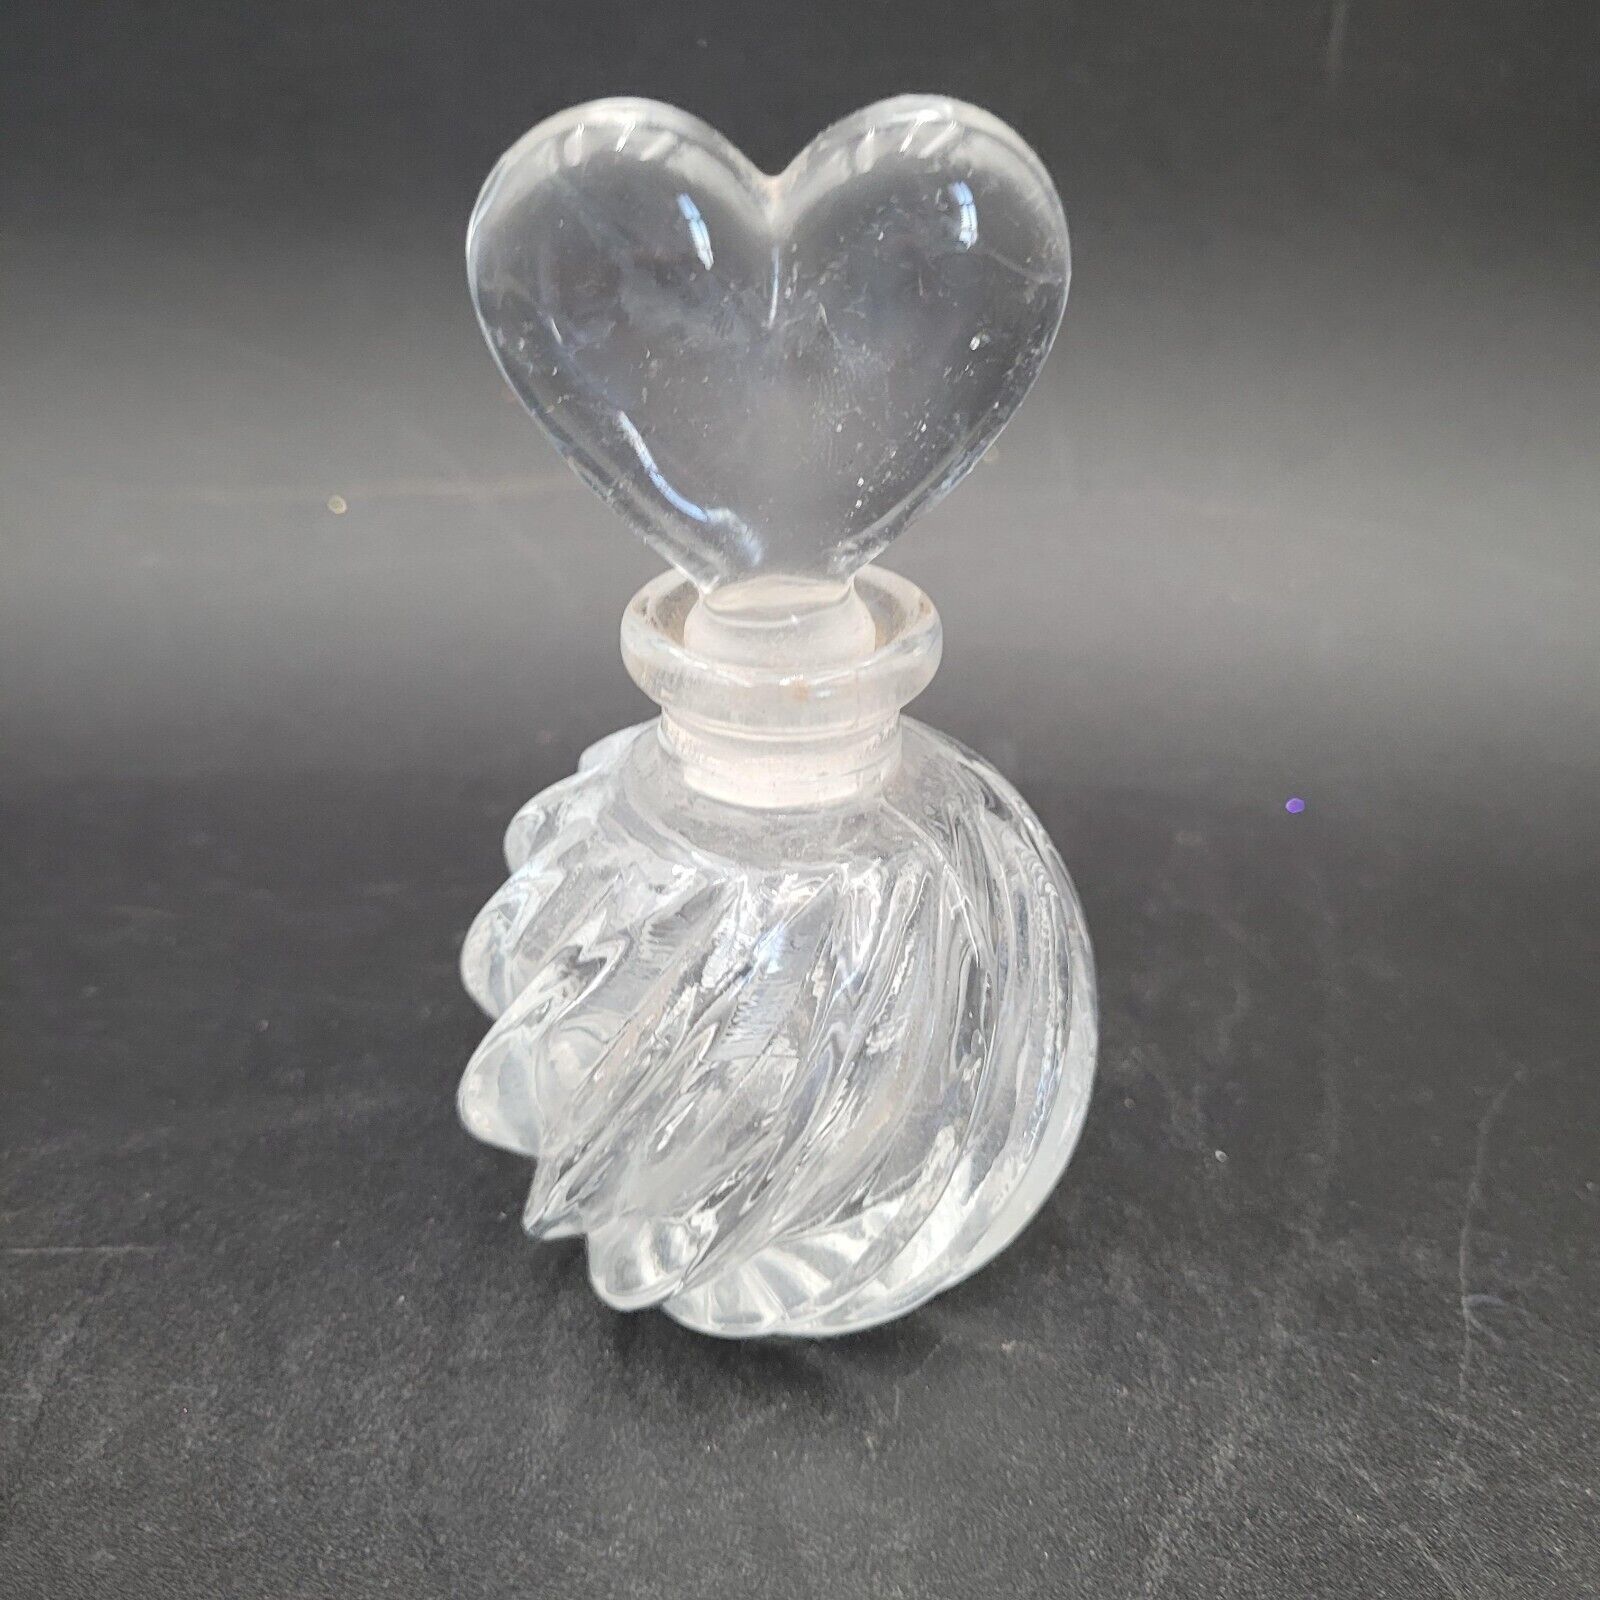 Primary image for Vintage 1970’s Round Crystal Swirled Perfume Bottle With Thick Heart Stopper 4"